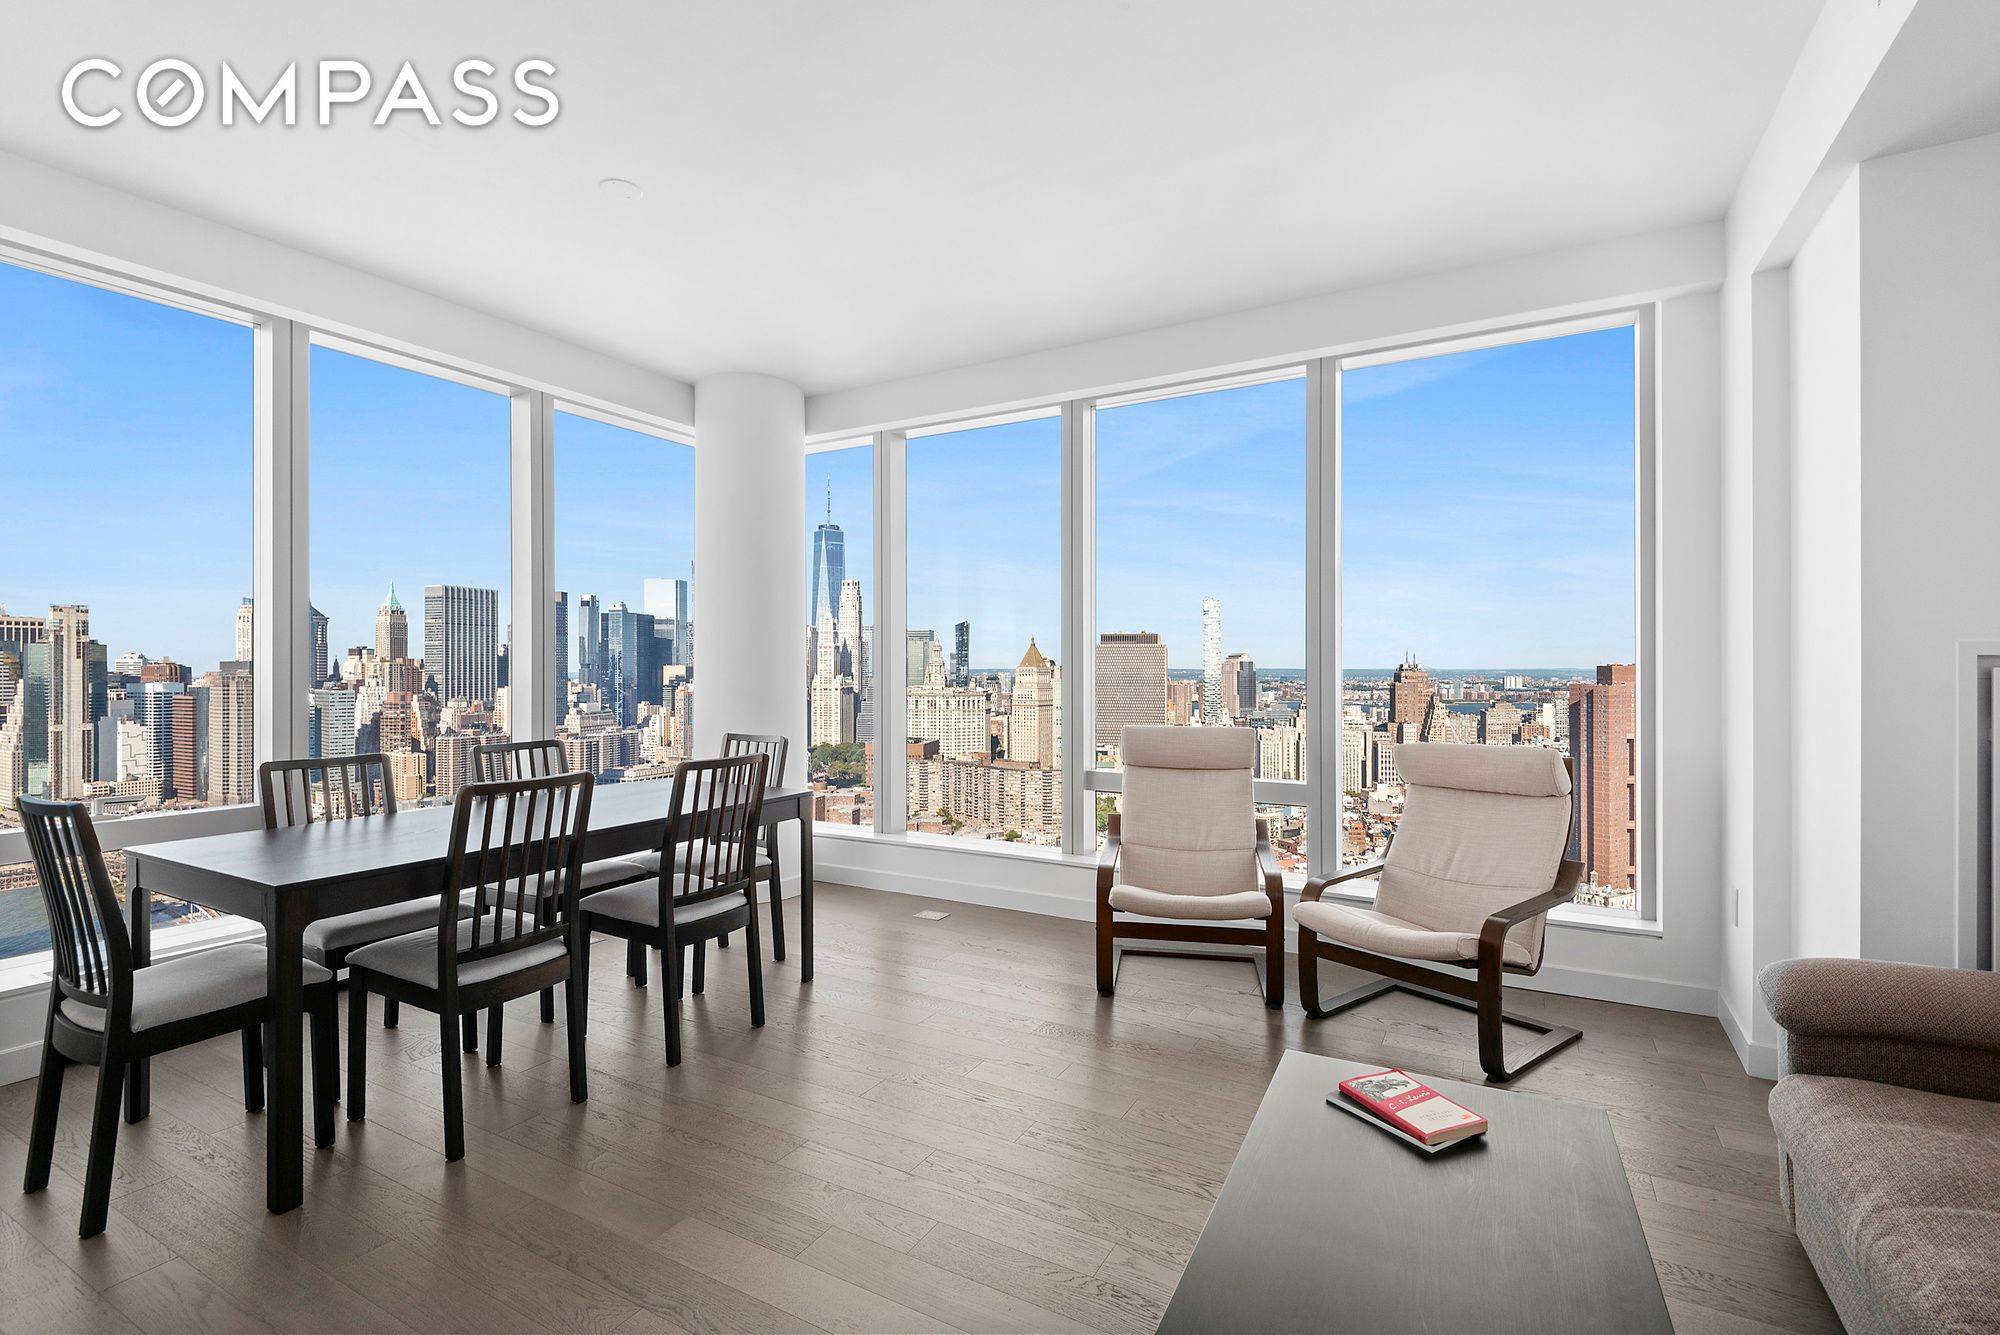 Welcome home to this brand new, never lived in luxury apartment with sweeping views of lower Manhattan, Brooklyn, and the East River.